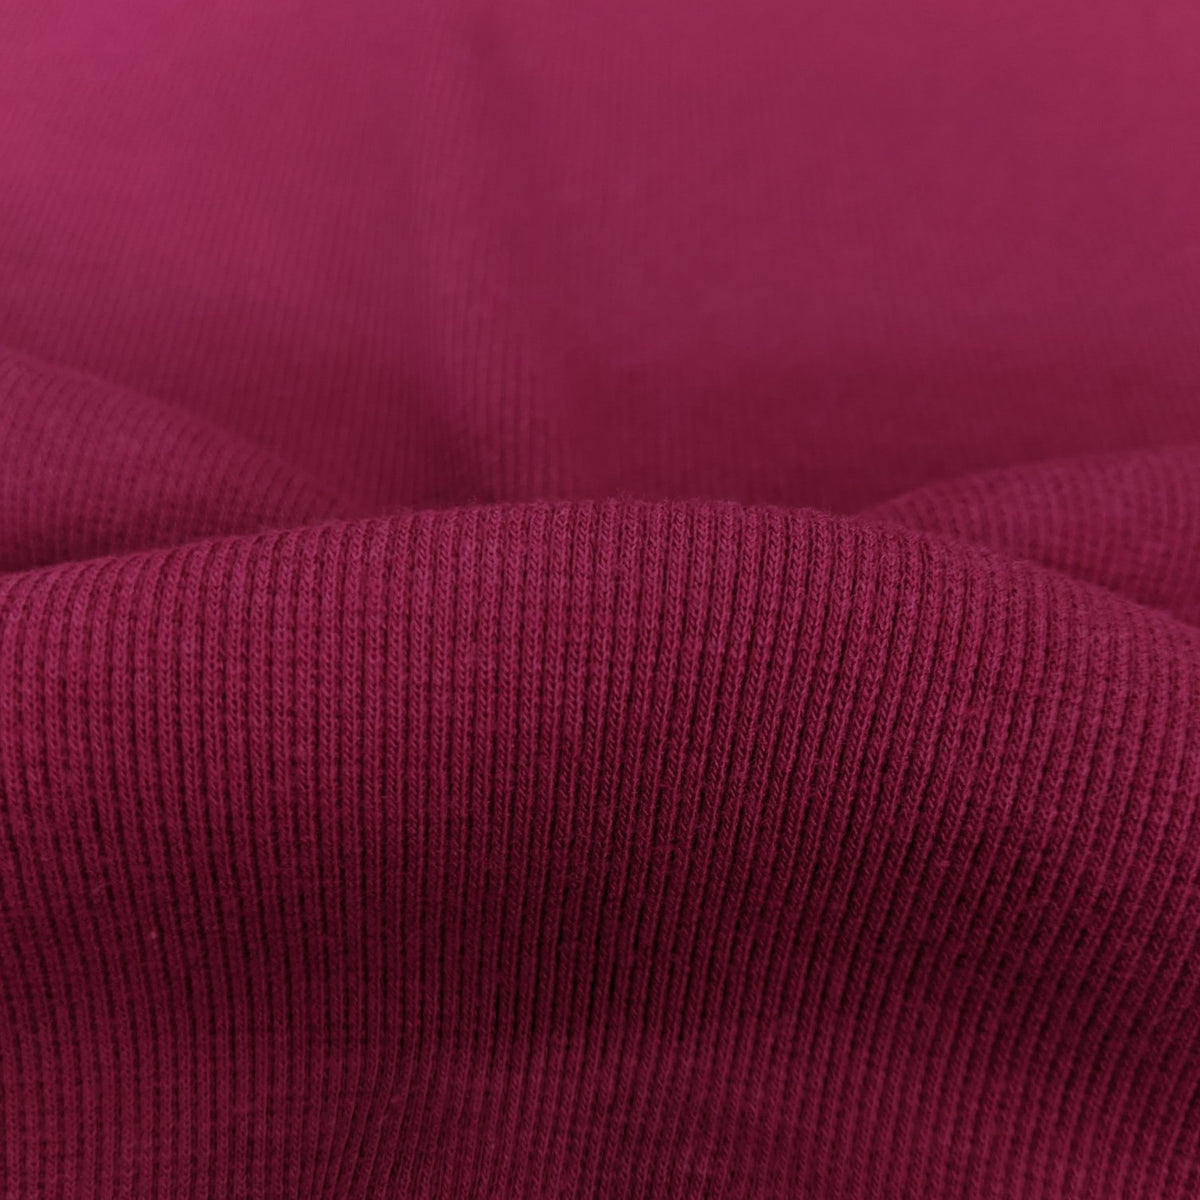 Remnant: Bamboo & Cotton Stretch Fleece Coordinating Ribbing - Framboise (.5 metres)